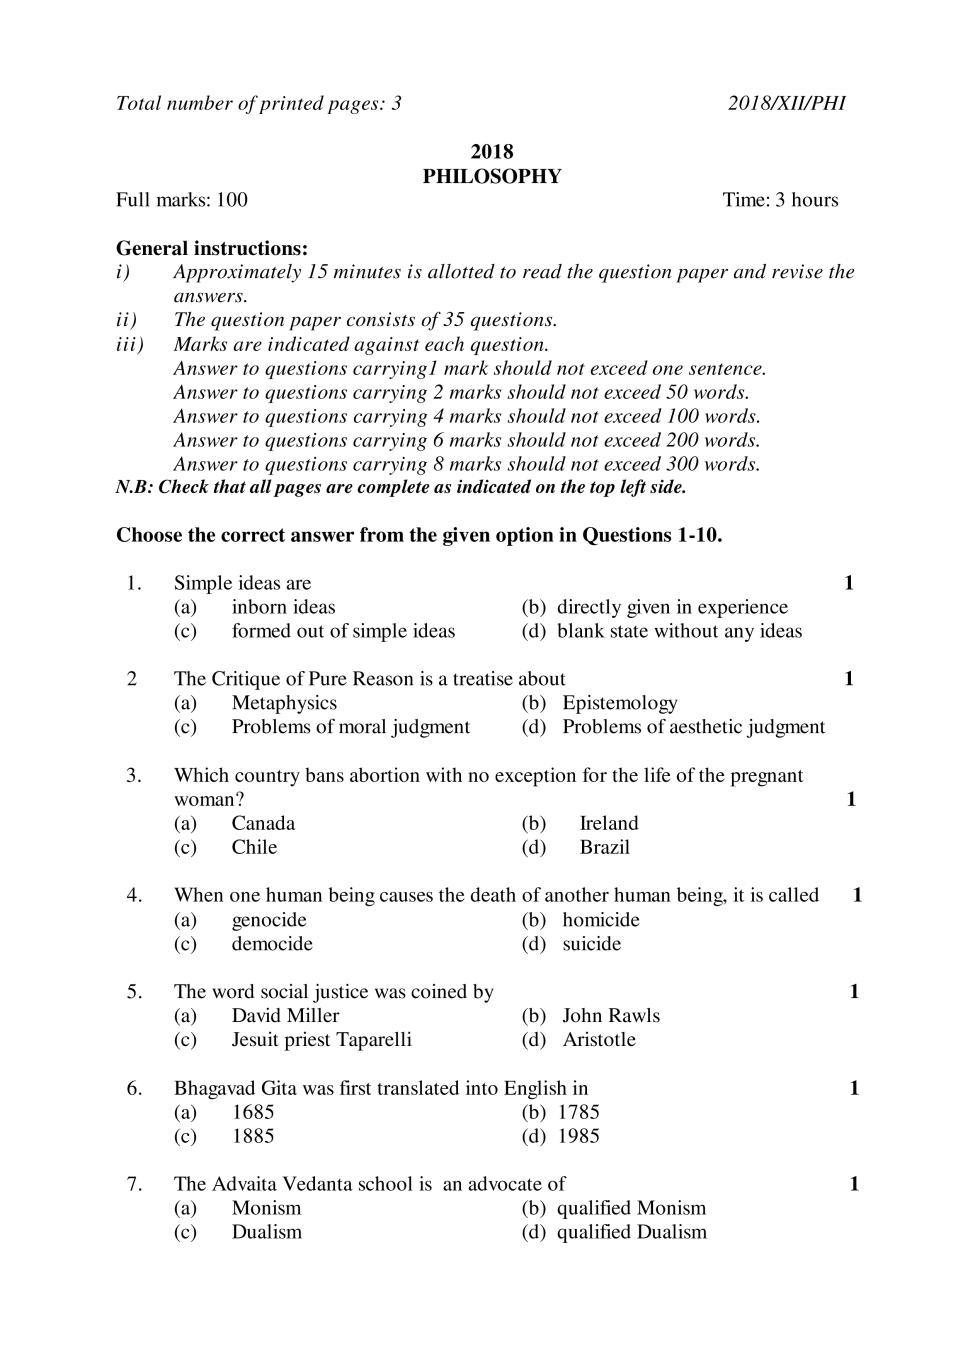 NBSE Class 12 Question Paper 2018 for Philosophy - Page 1